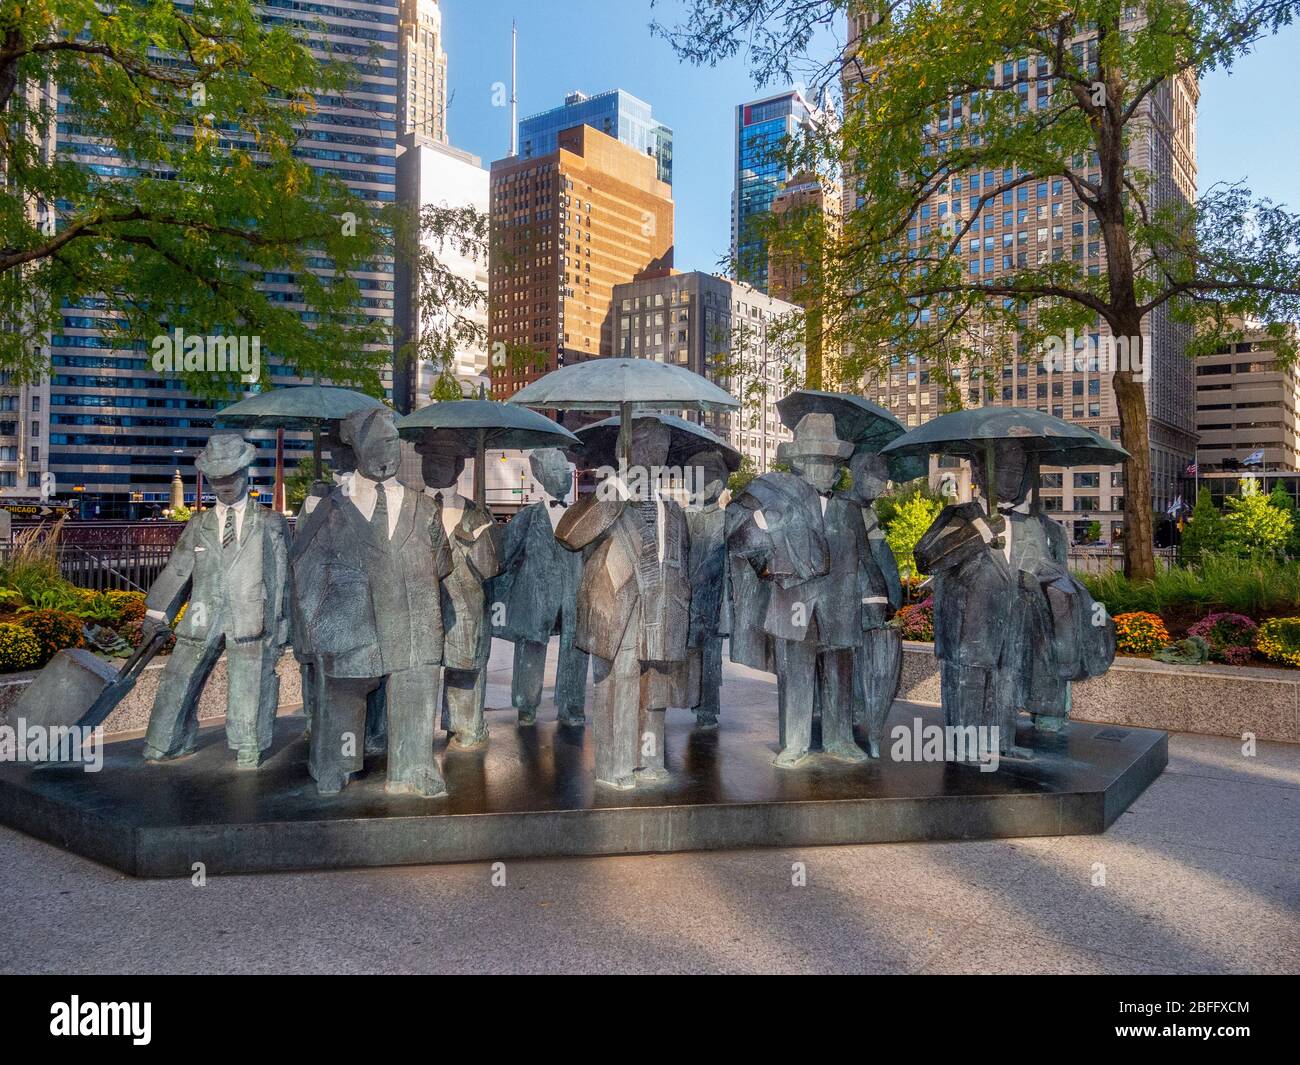 The Living World Series Gentlemen Statue by Taiwanese sculptor Ju Ming This artwork is prominently displayed on the Chicago AMA Plaza. The Gentlemen are part of Ju’s “Living World Series,” featuring eleven bronze plated figures draped in trench jackets and holding umbrellas. Blocky and minimalist, the figures are reduced to the basic forms intentionally to embrace the inner spiritual qualities within human bodies. Stock Photo